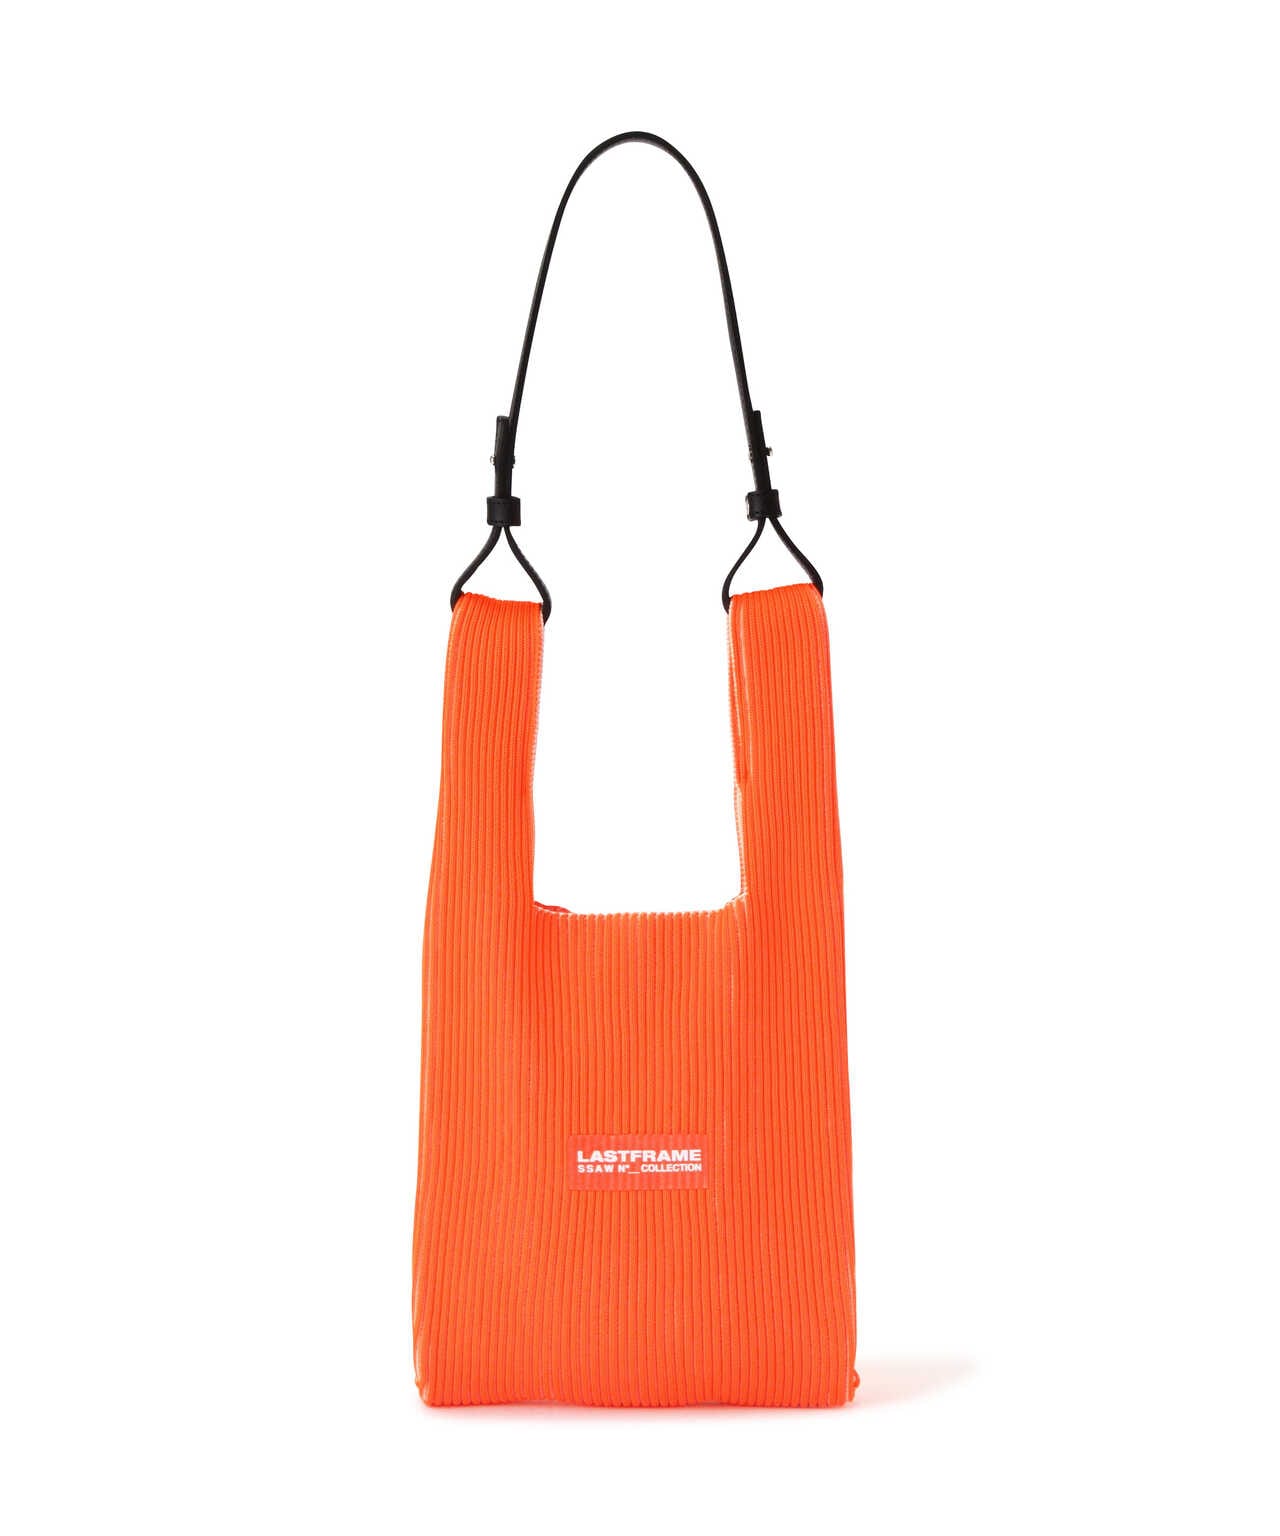 LASTFRAME/ラストフレーム/TWO TONE MARKET BAG SMALL